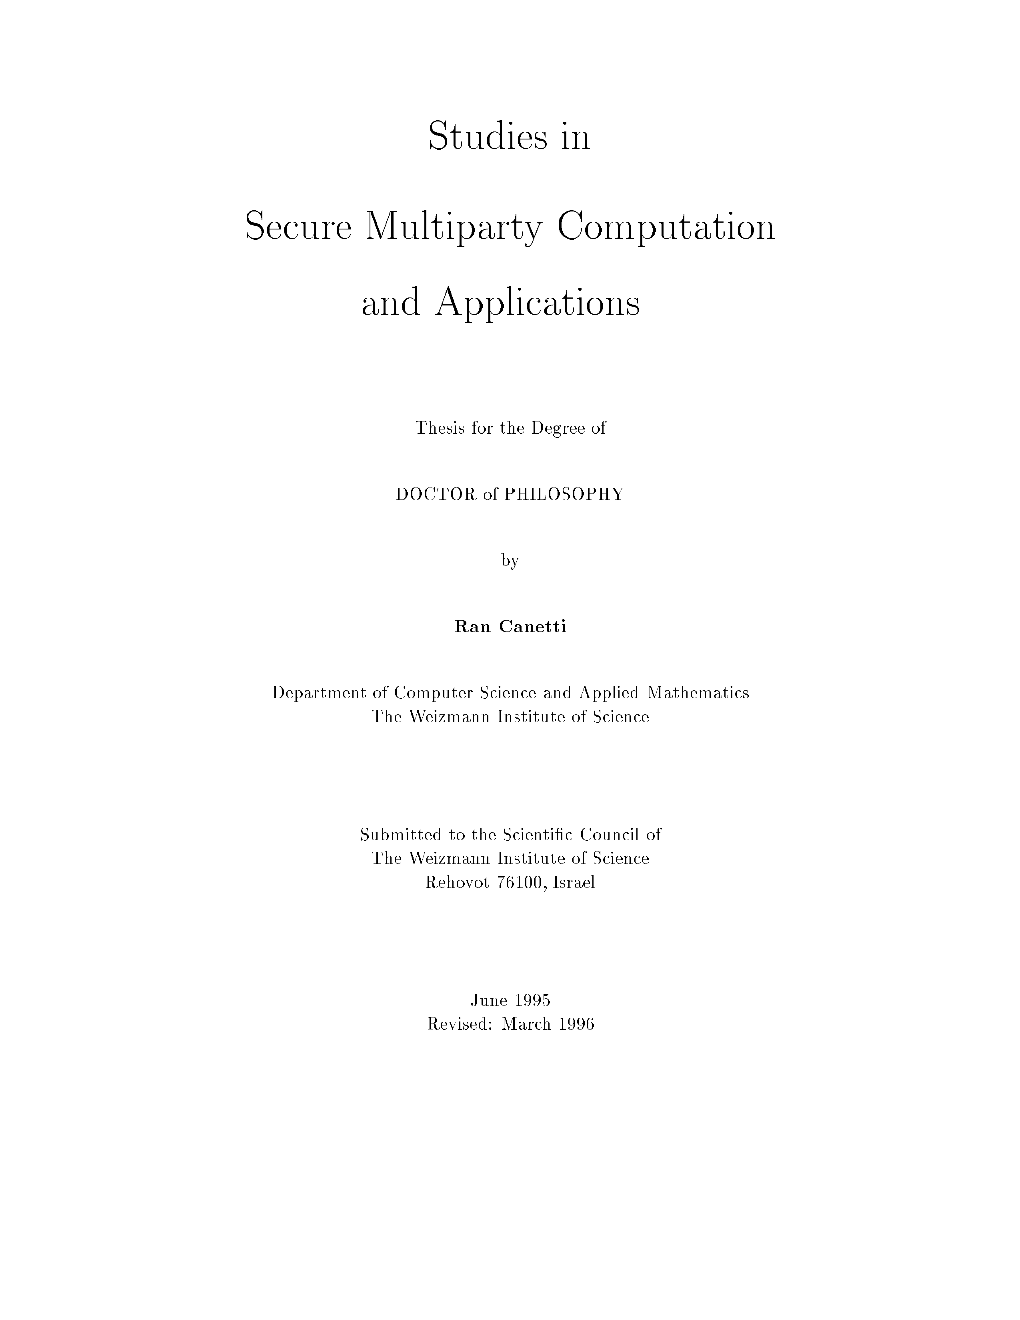 Studies in Secure Multiparty Computation and Applications